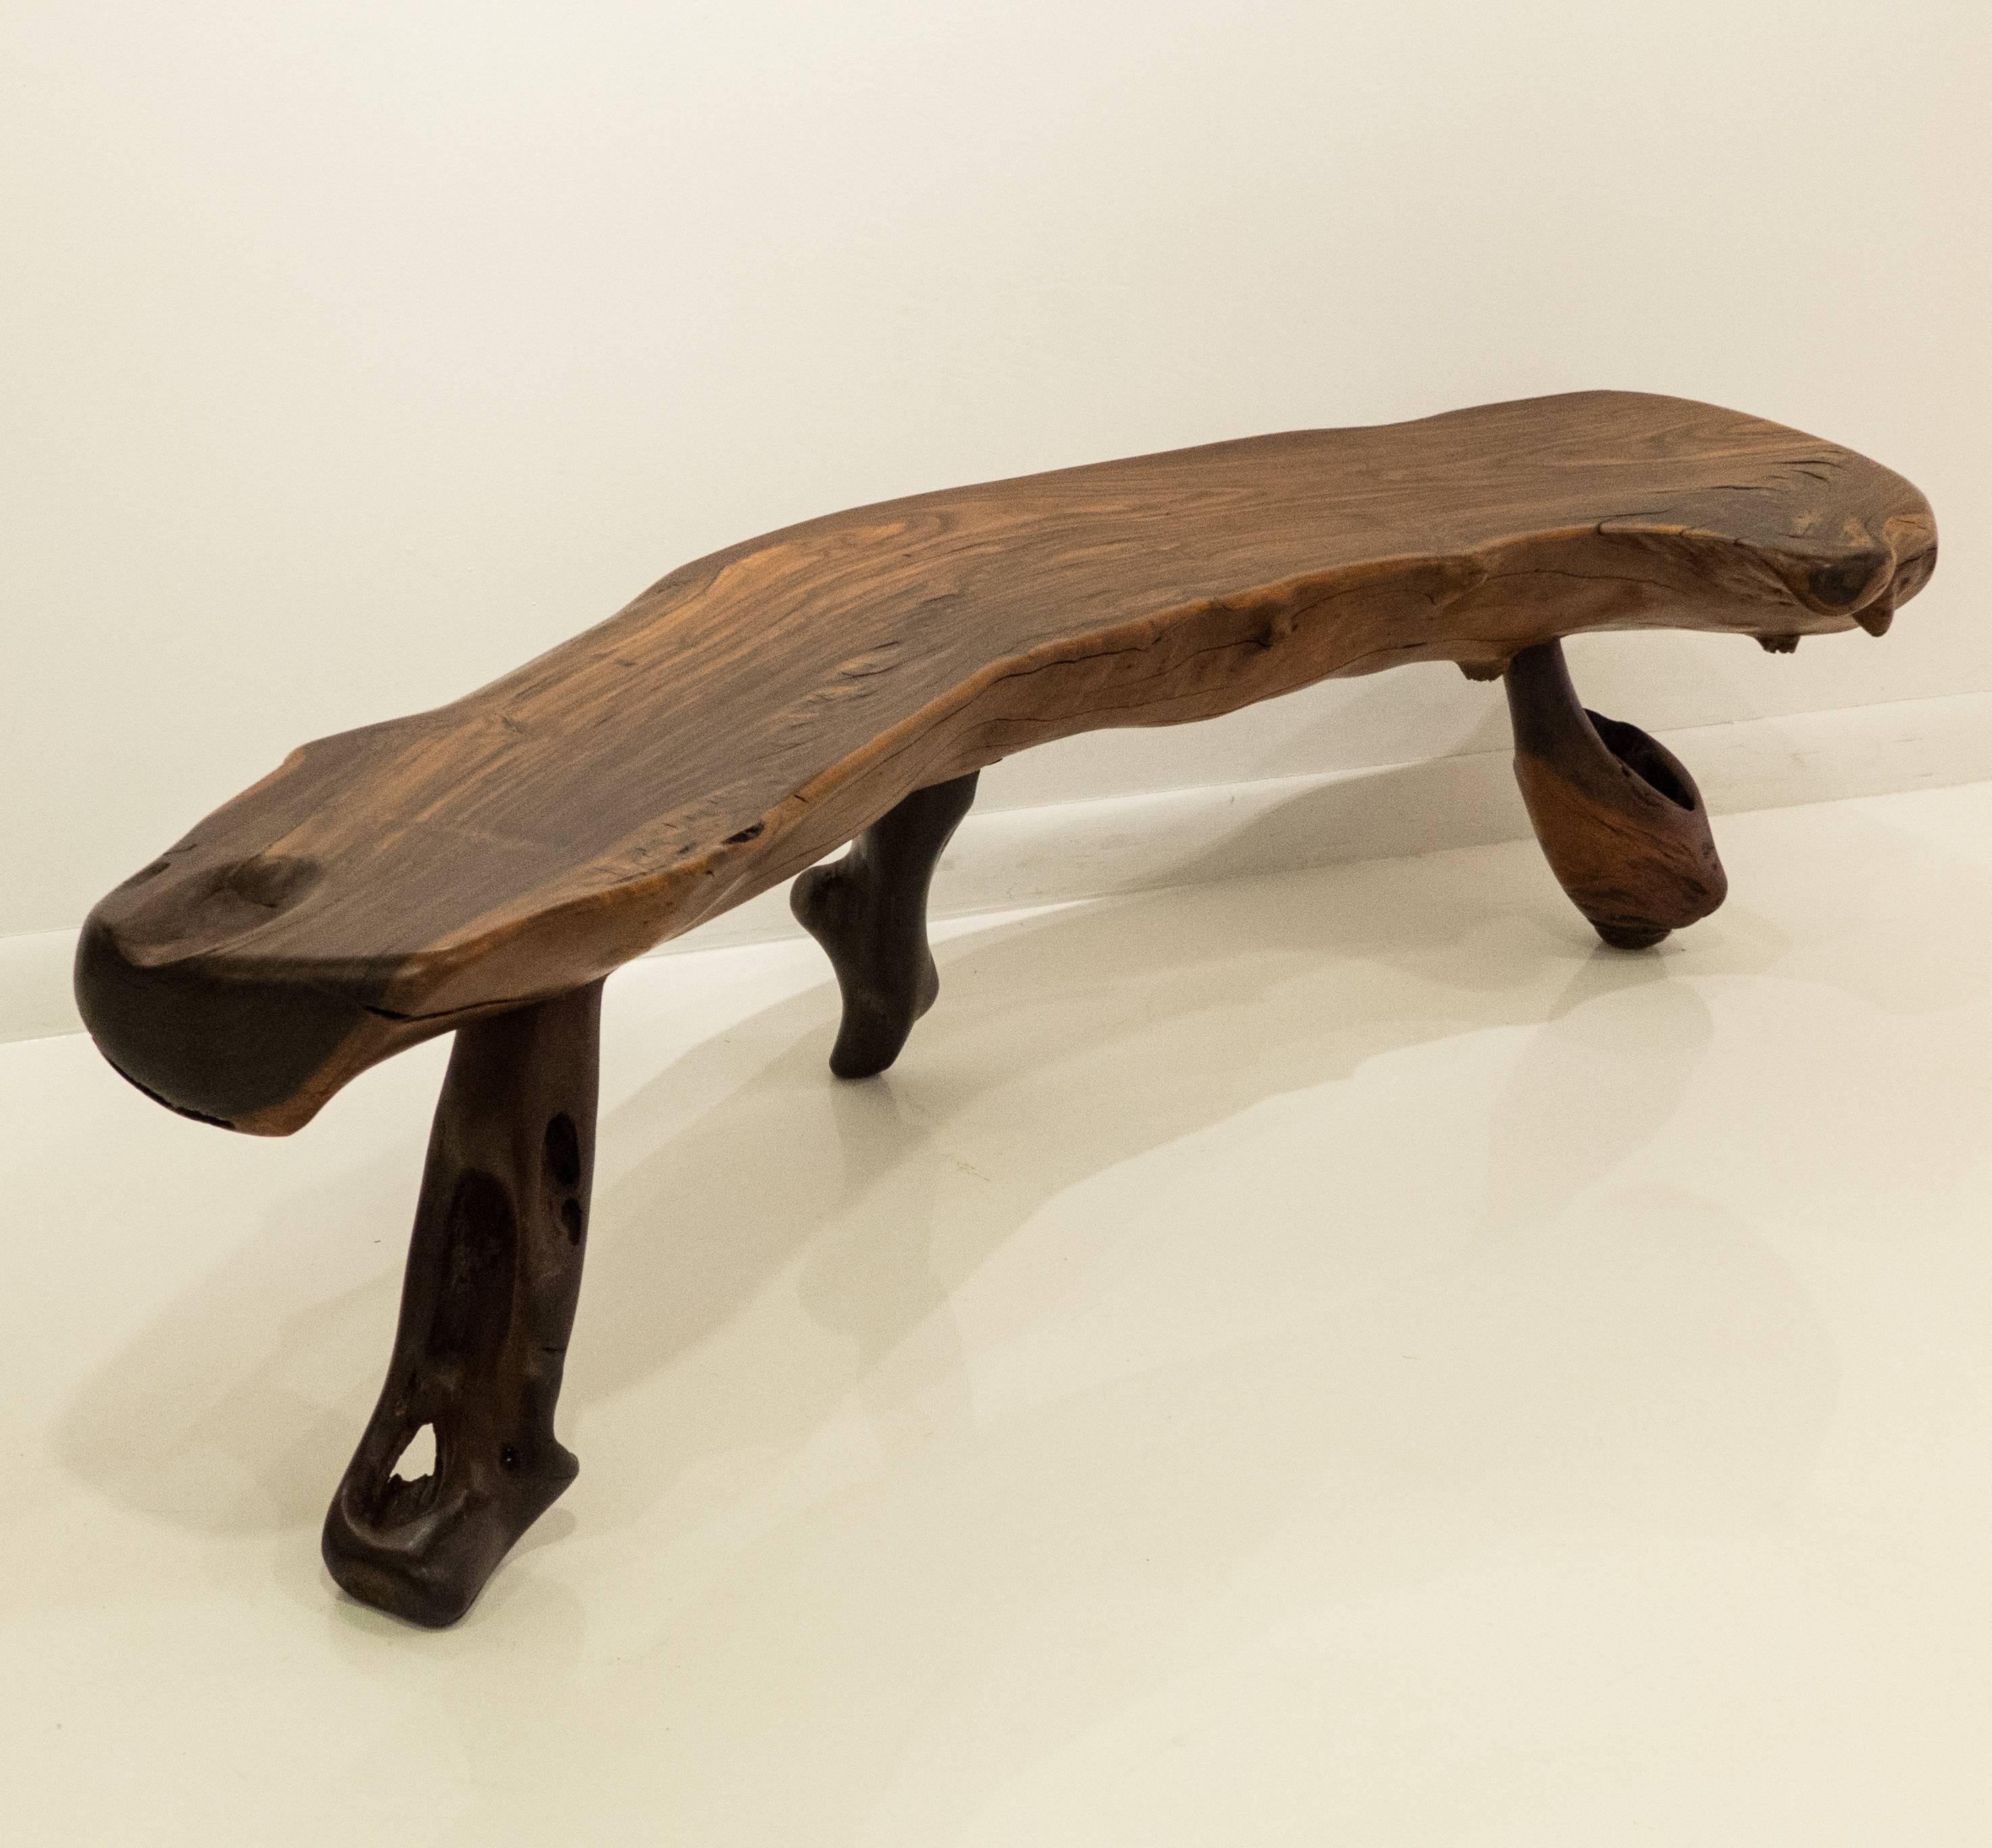 Sculptural bench or table in solid Brazilian rosewood with Brazilian rosewood burl legs. Purchased in Mexico, 1960s. A well-crafted piece featuring a spectacularly grained, polished live-edge top with three burl legs each with its own abstract